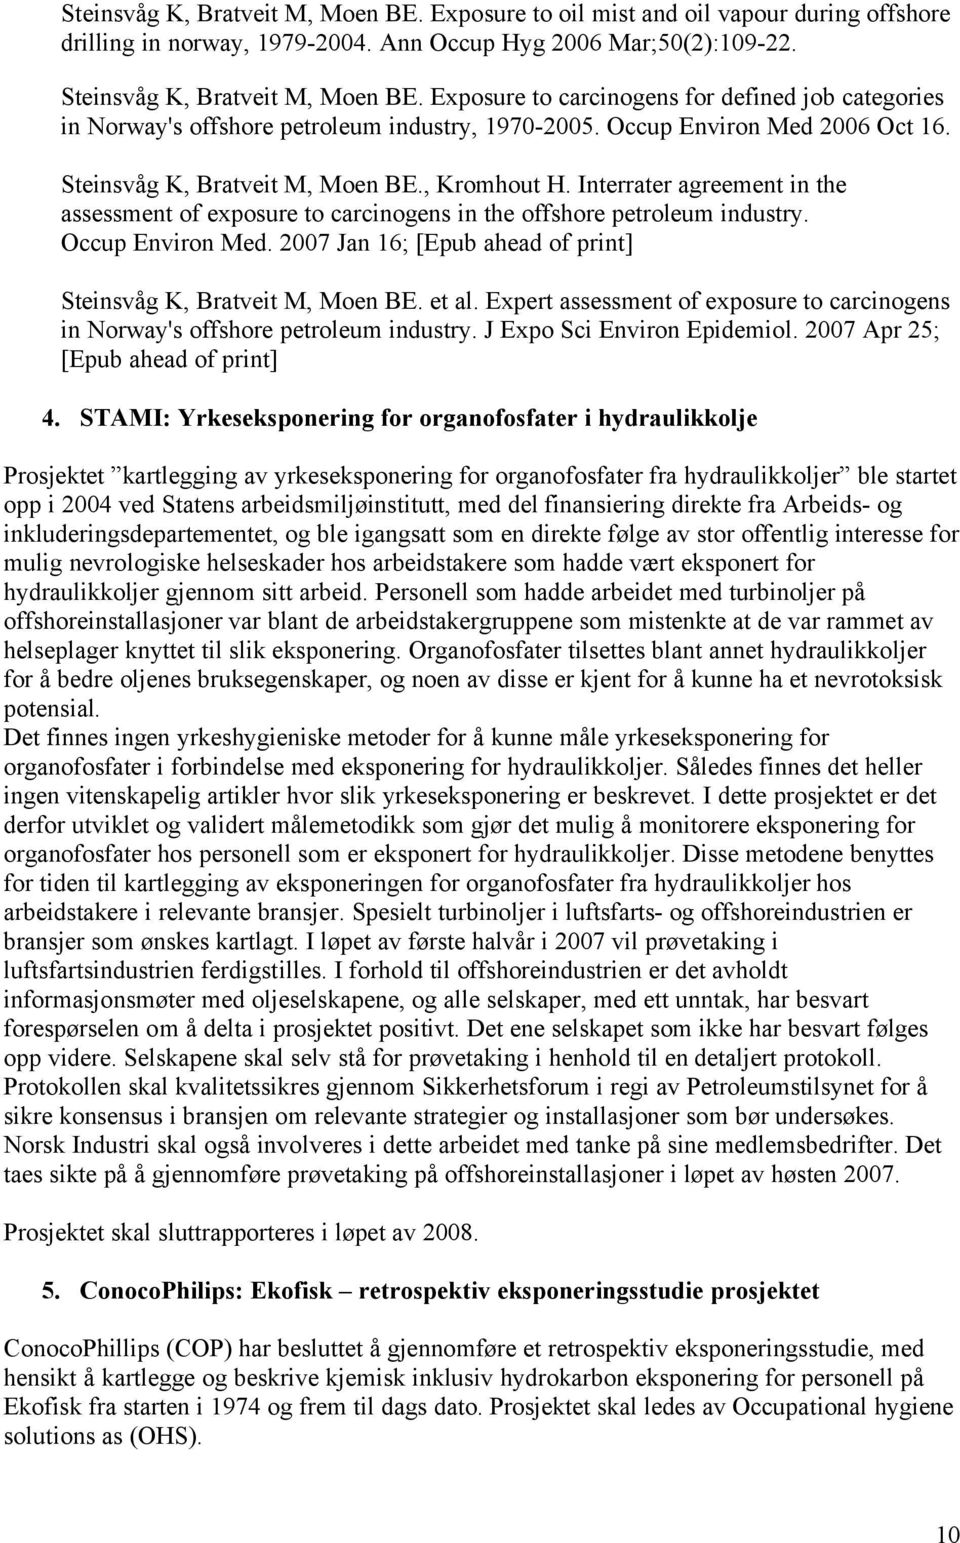 Interrater agreement in the assessment of exposure to carcinogens in the offshore petroleum industry. Occup Environ Med. 2007 Jan 16; [Epub ahead of print] Steinsvåg K, Bratveit M, Moen BE. et al.